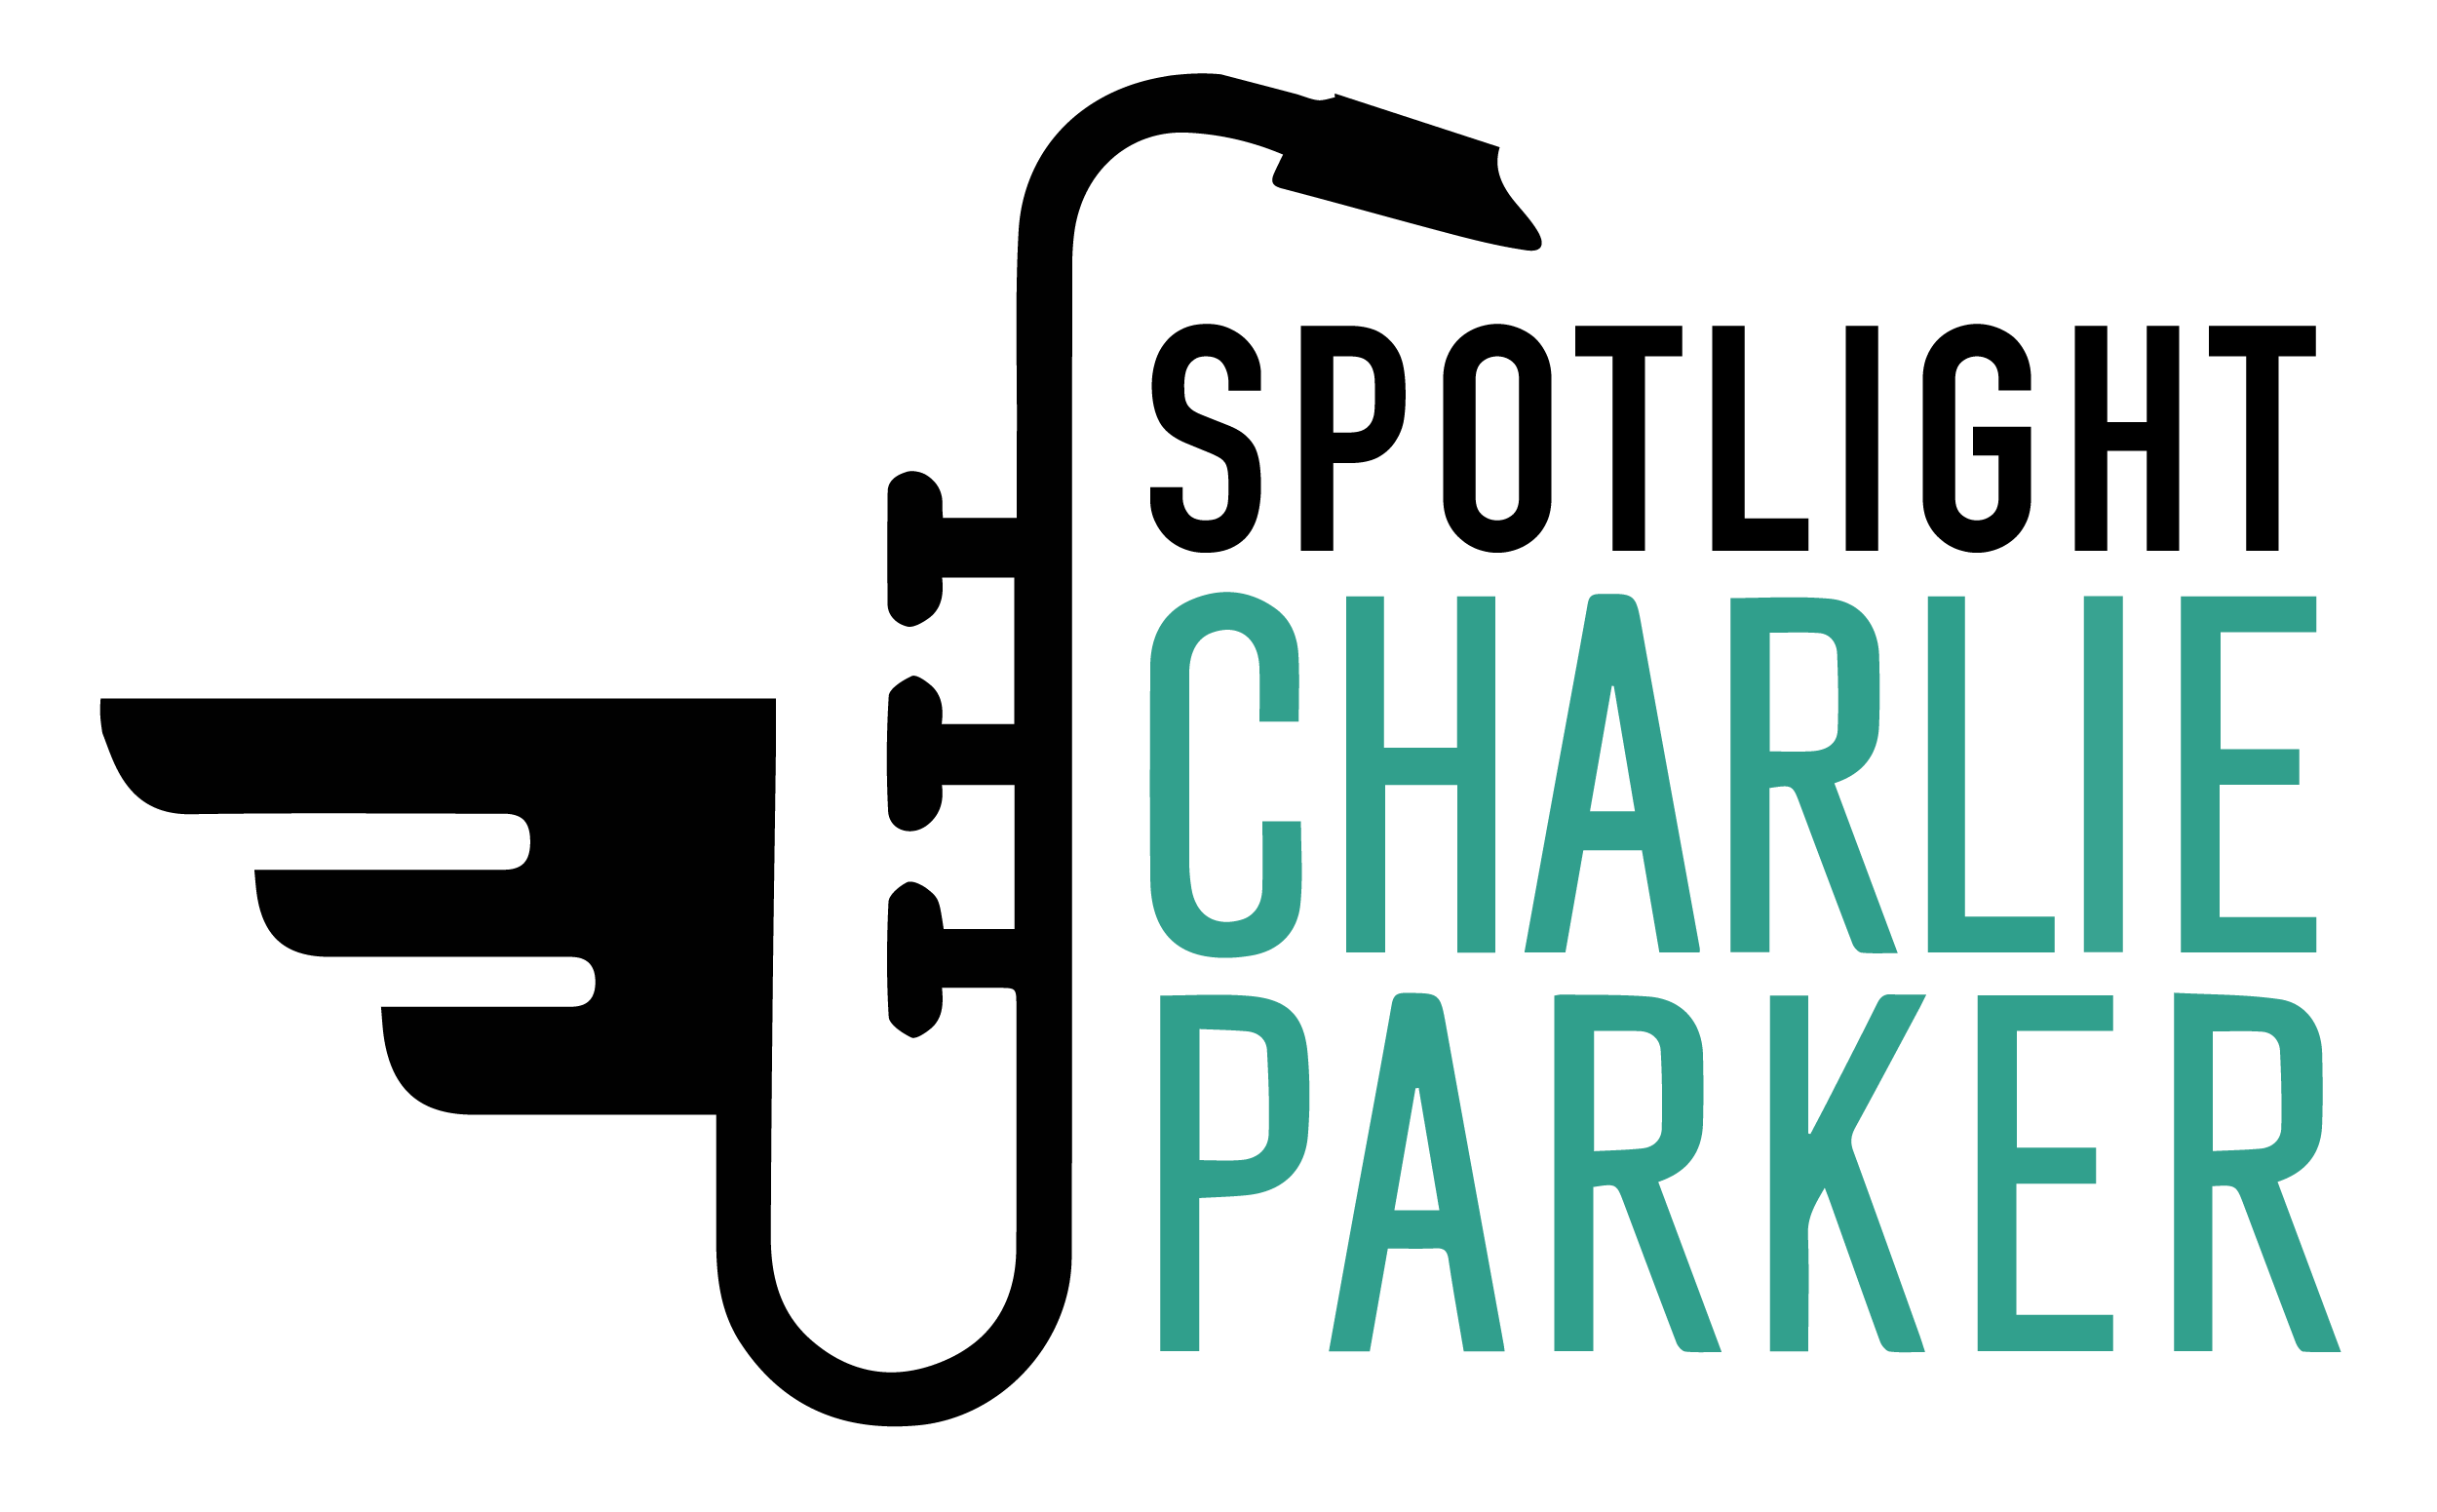 Early Bird: Charlie Parker at 18th & Vine Walking Tour